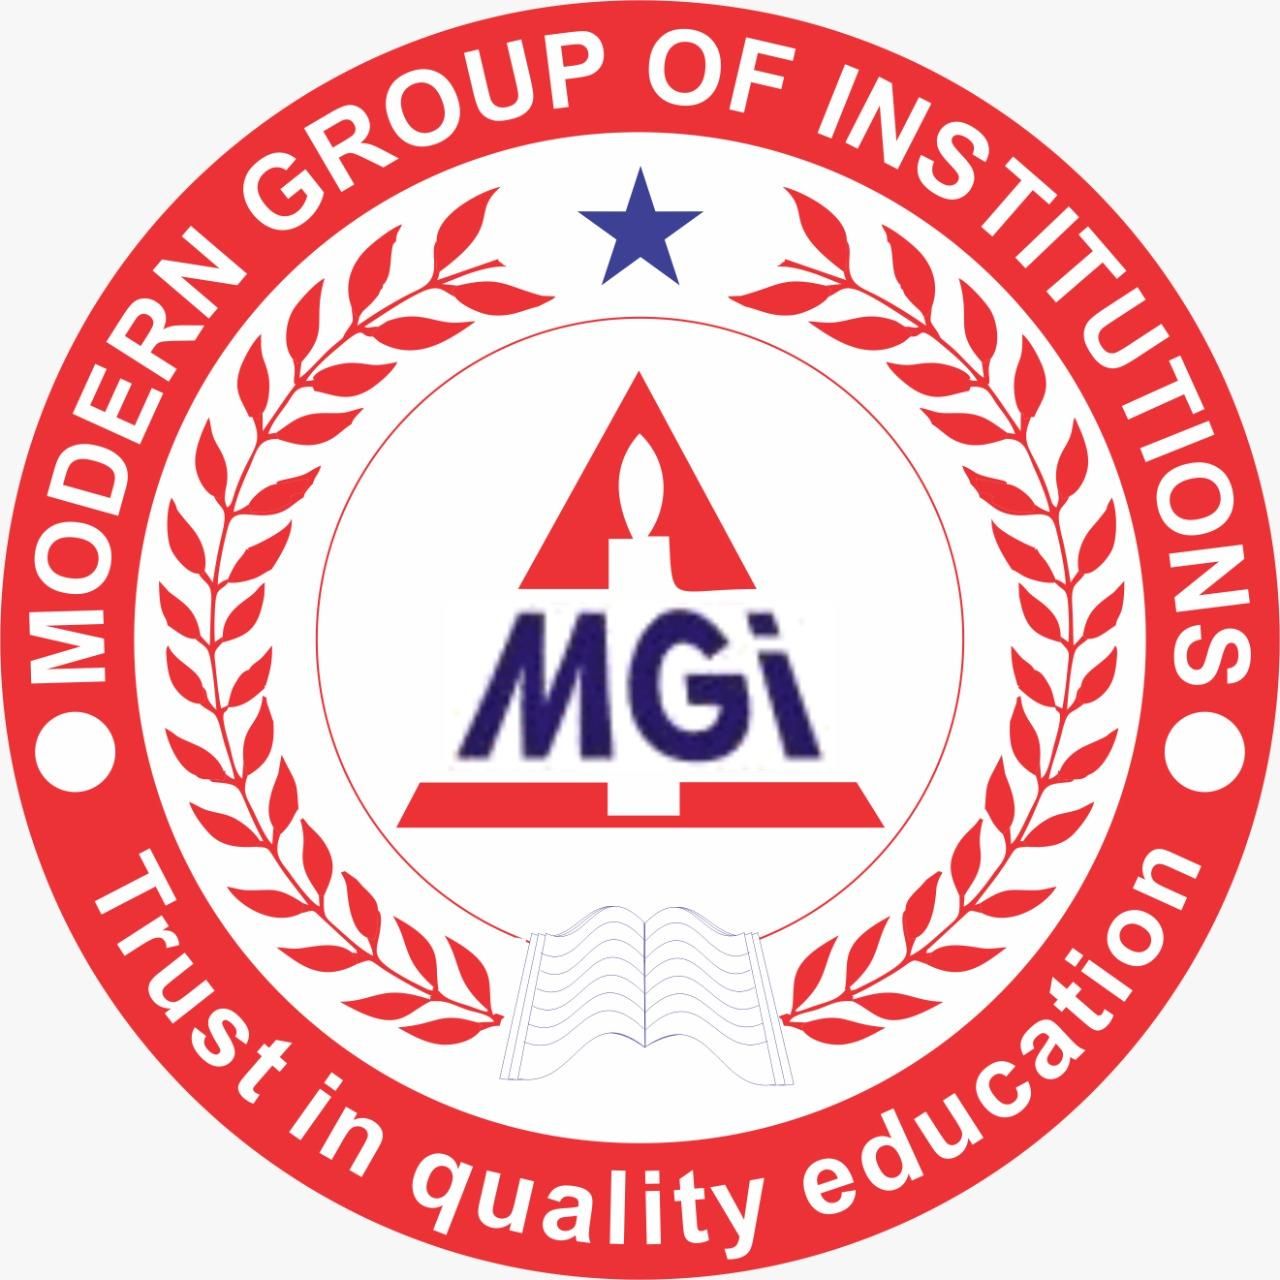 Modern Group of Institutions